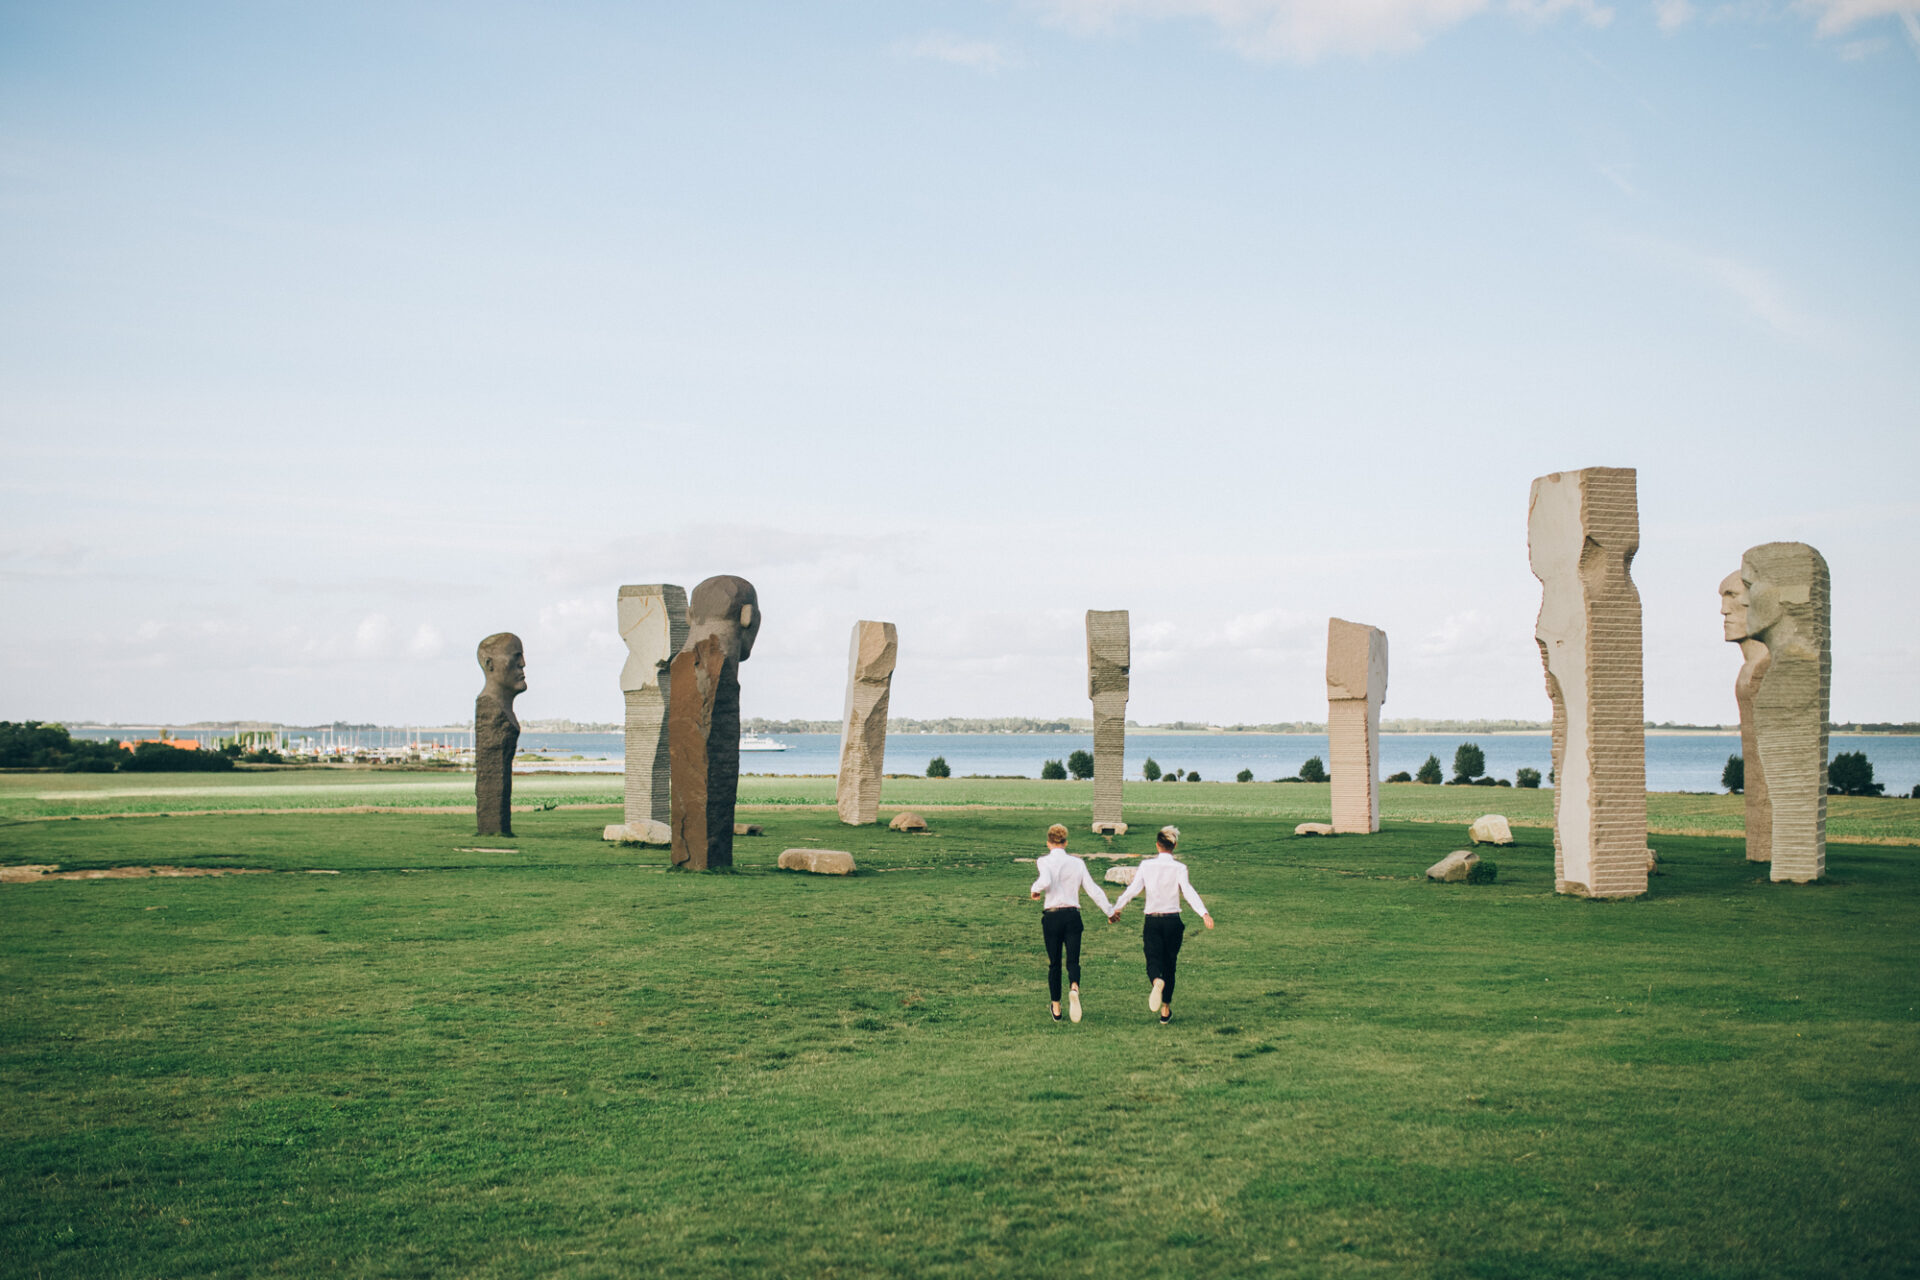 A romantic, laidback LGBT destination wedding on Lolland-Falster islands at the Dodecalith art installation by the sea.